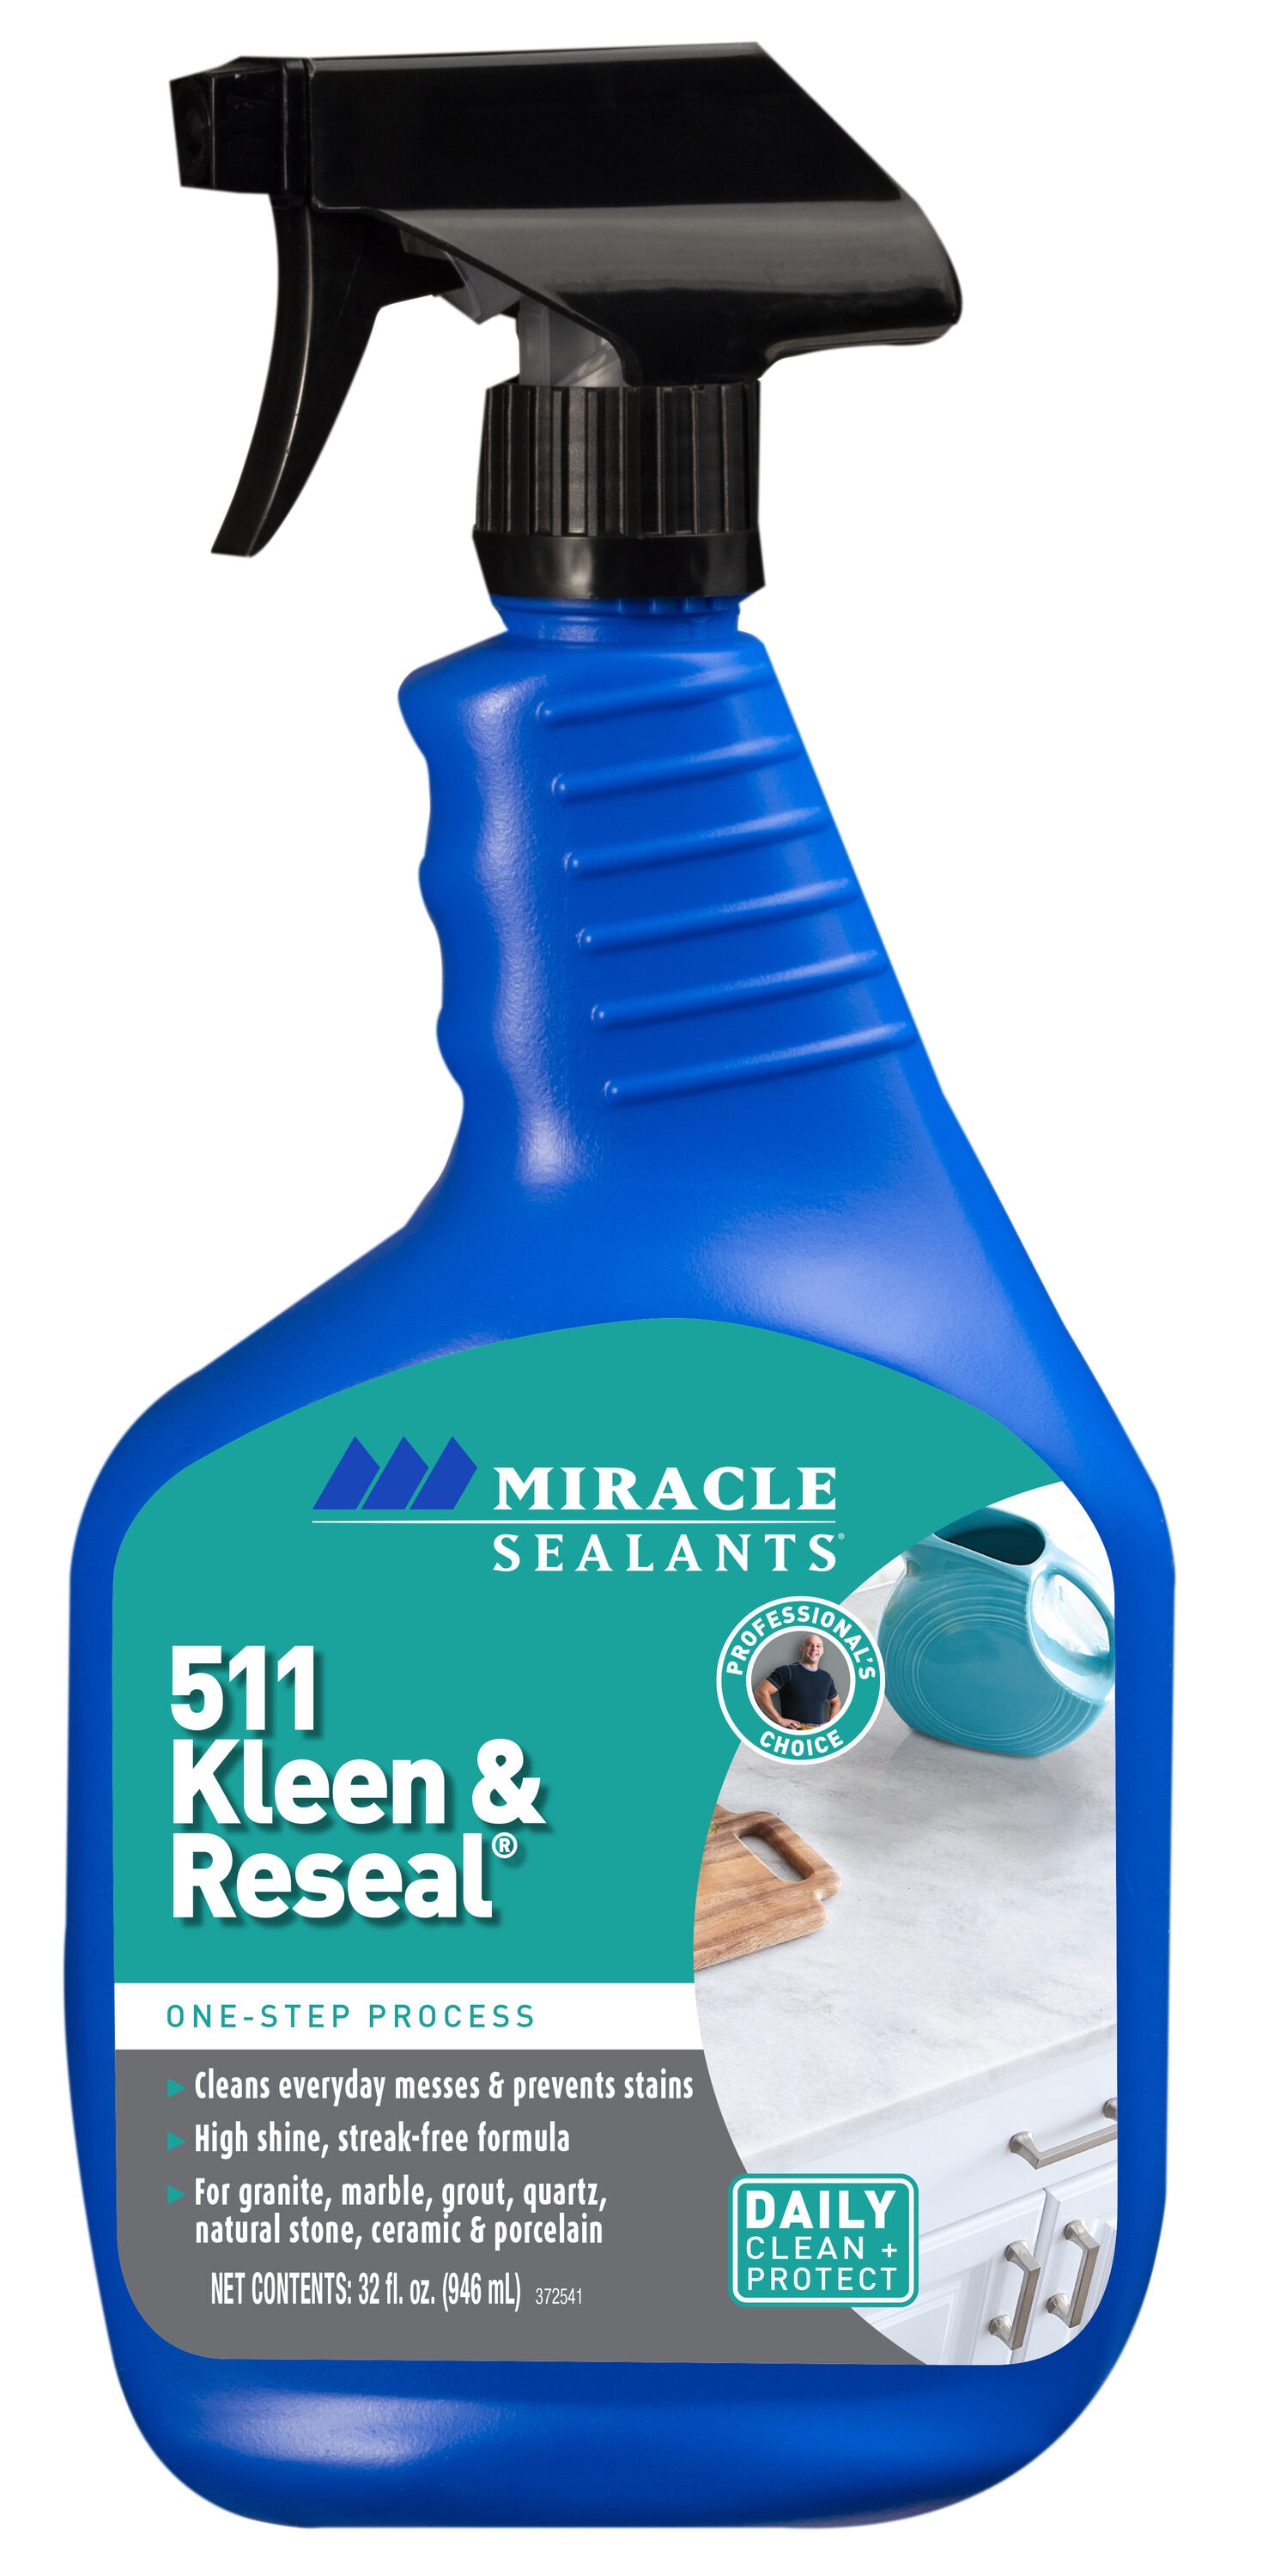 Miracle Sealants Routine Tile Cleaner (32-fl oz)